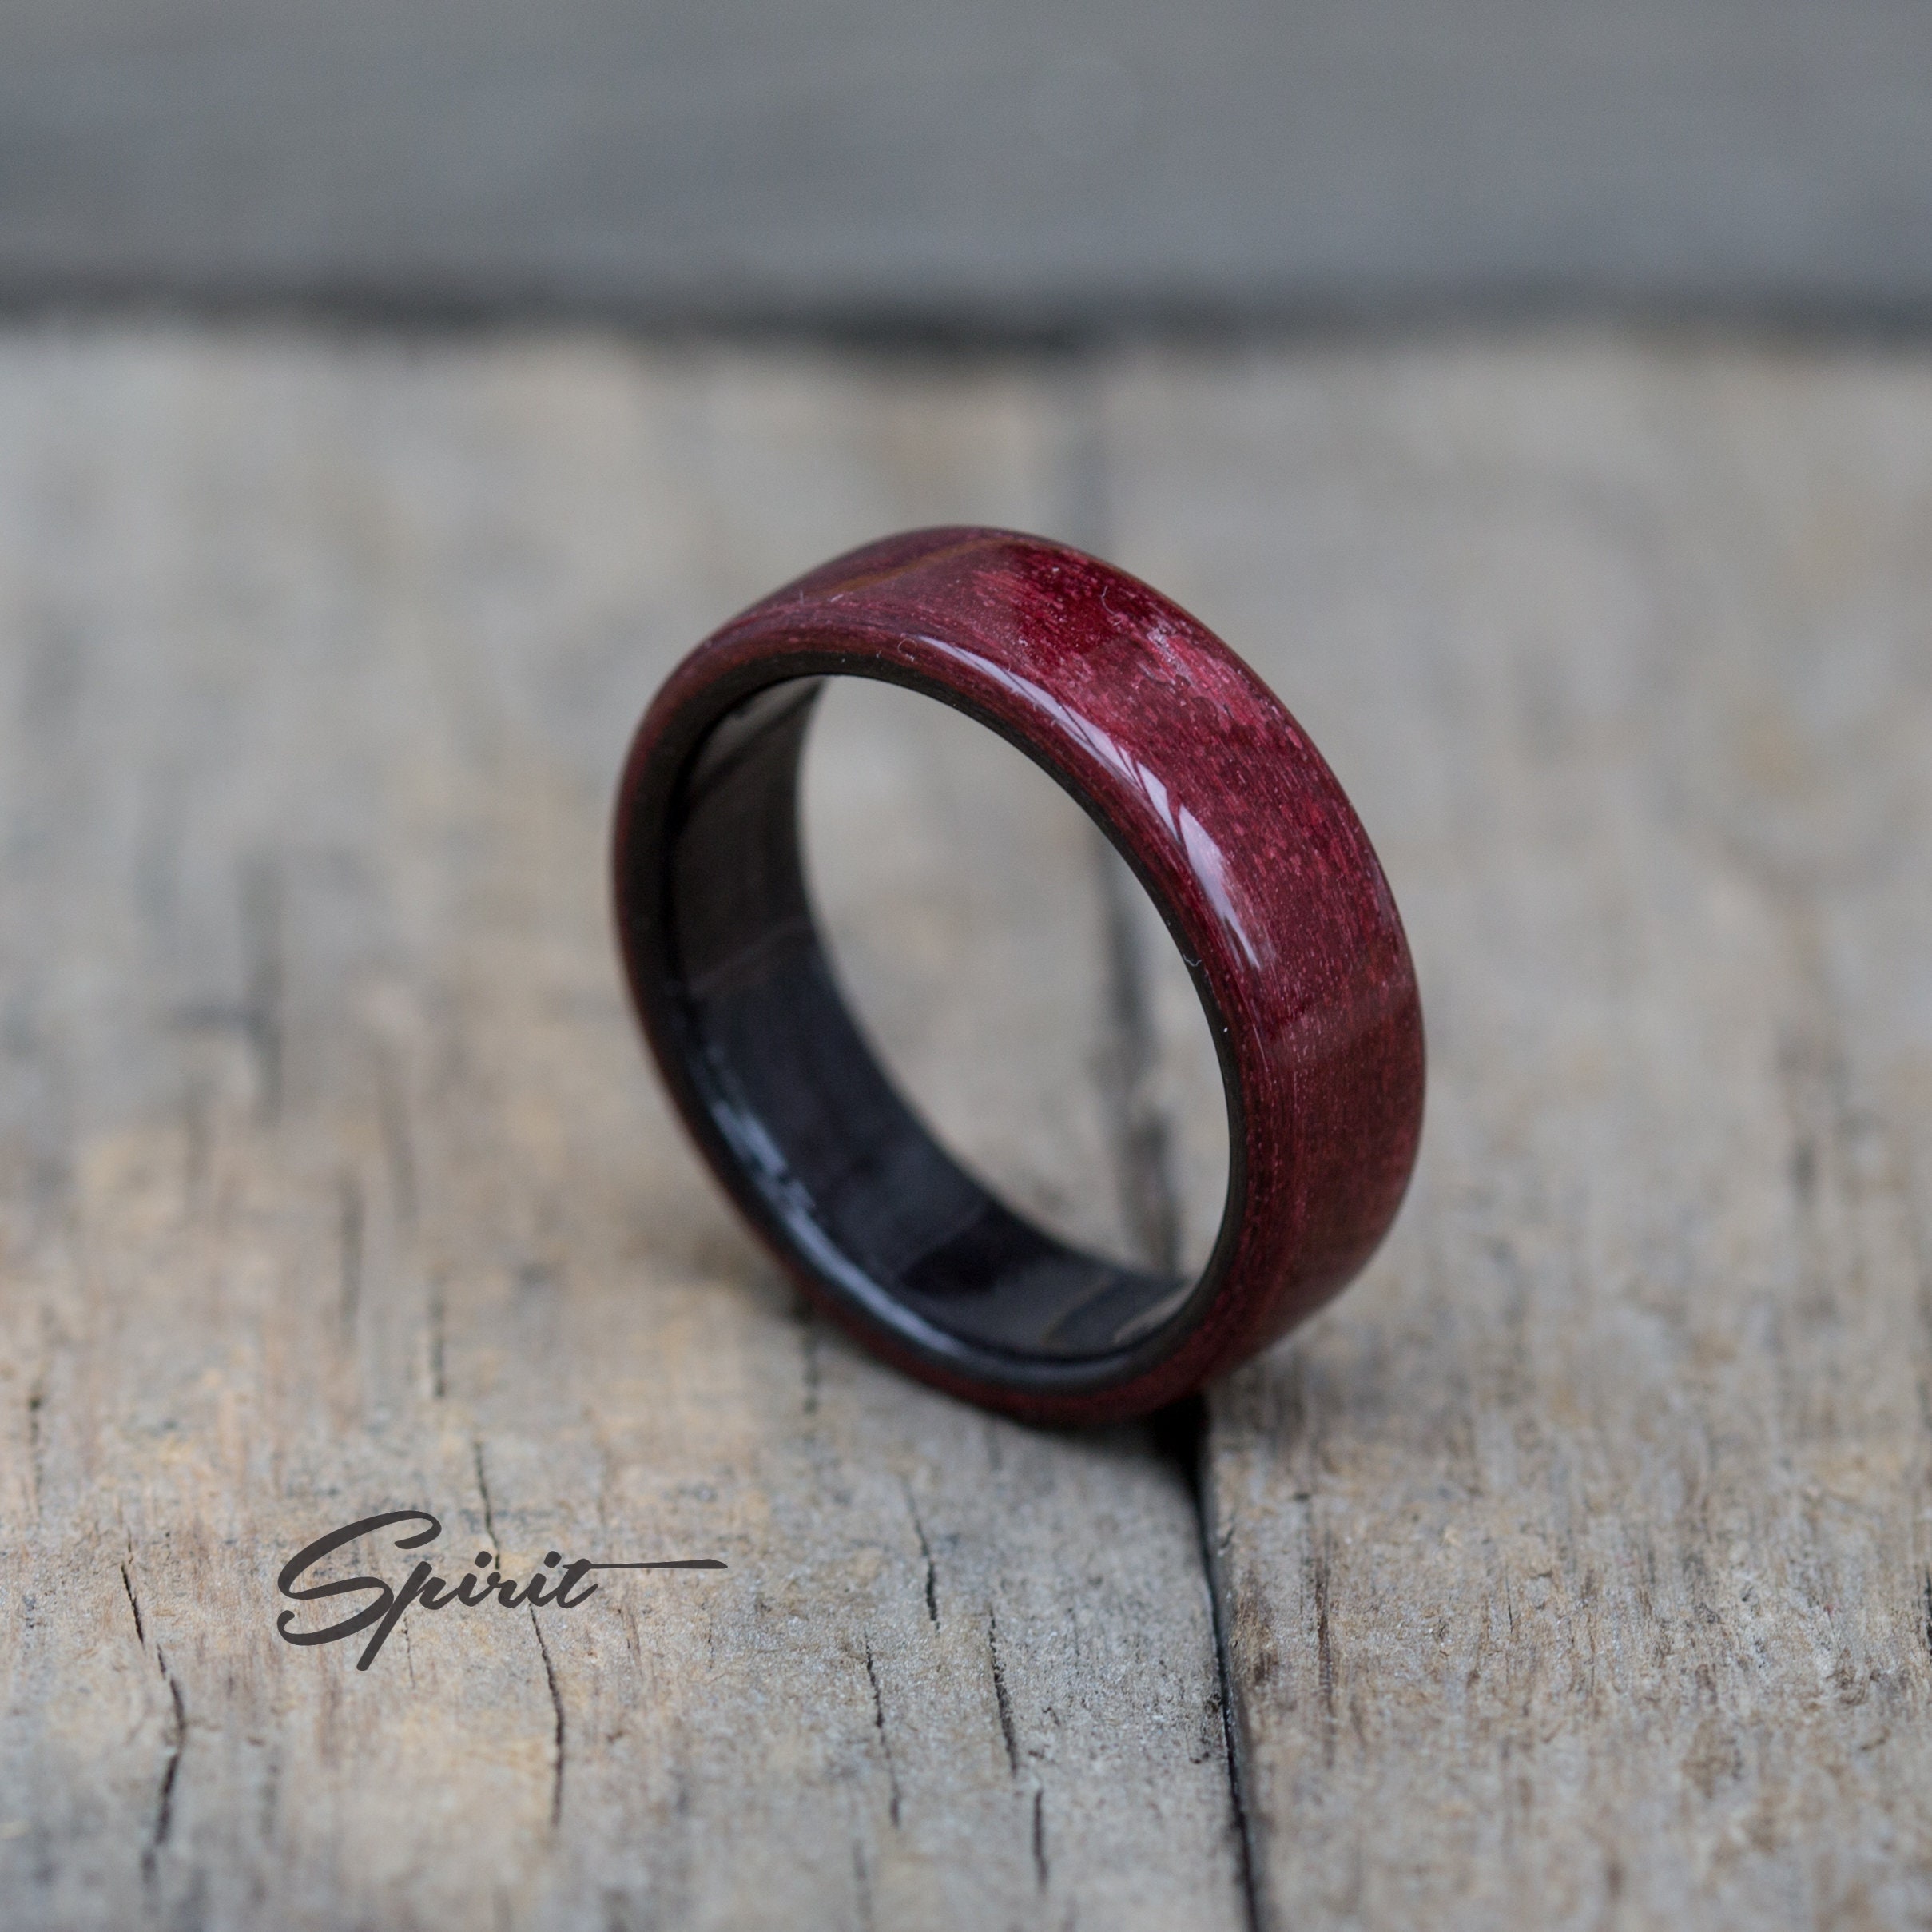 SHOP ALL - Bentwood Jewelry Designs - Custom Handcrafted Bentwood Wood Rings